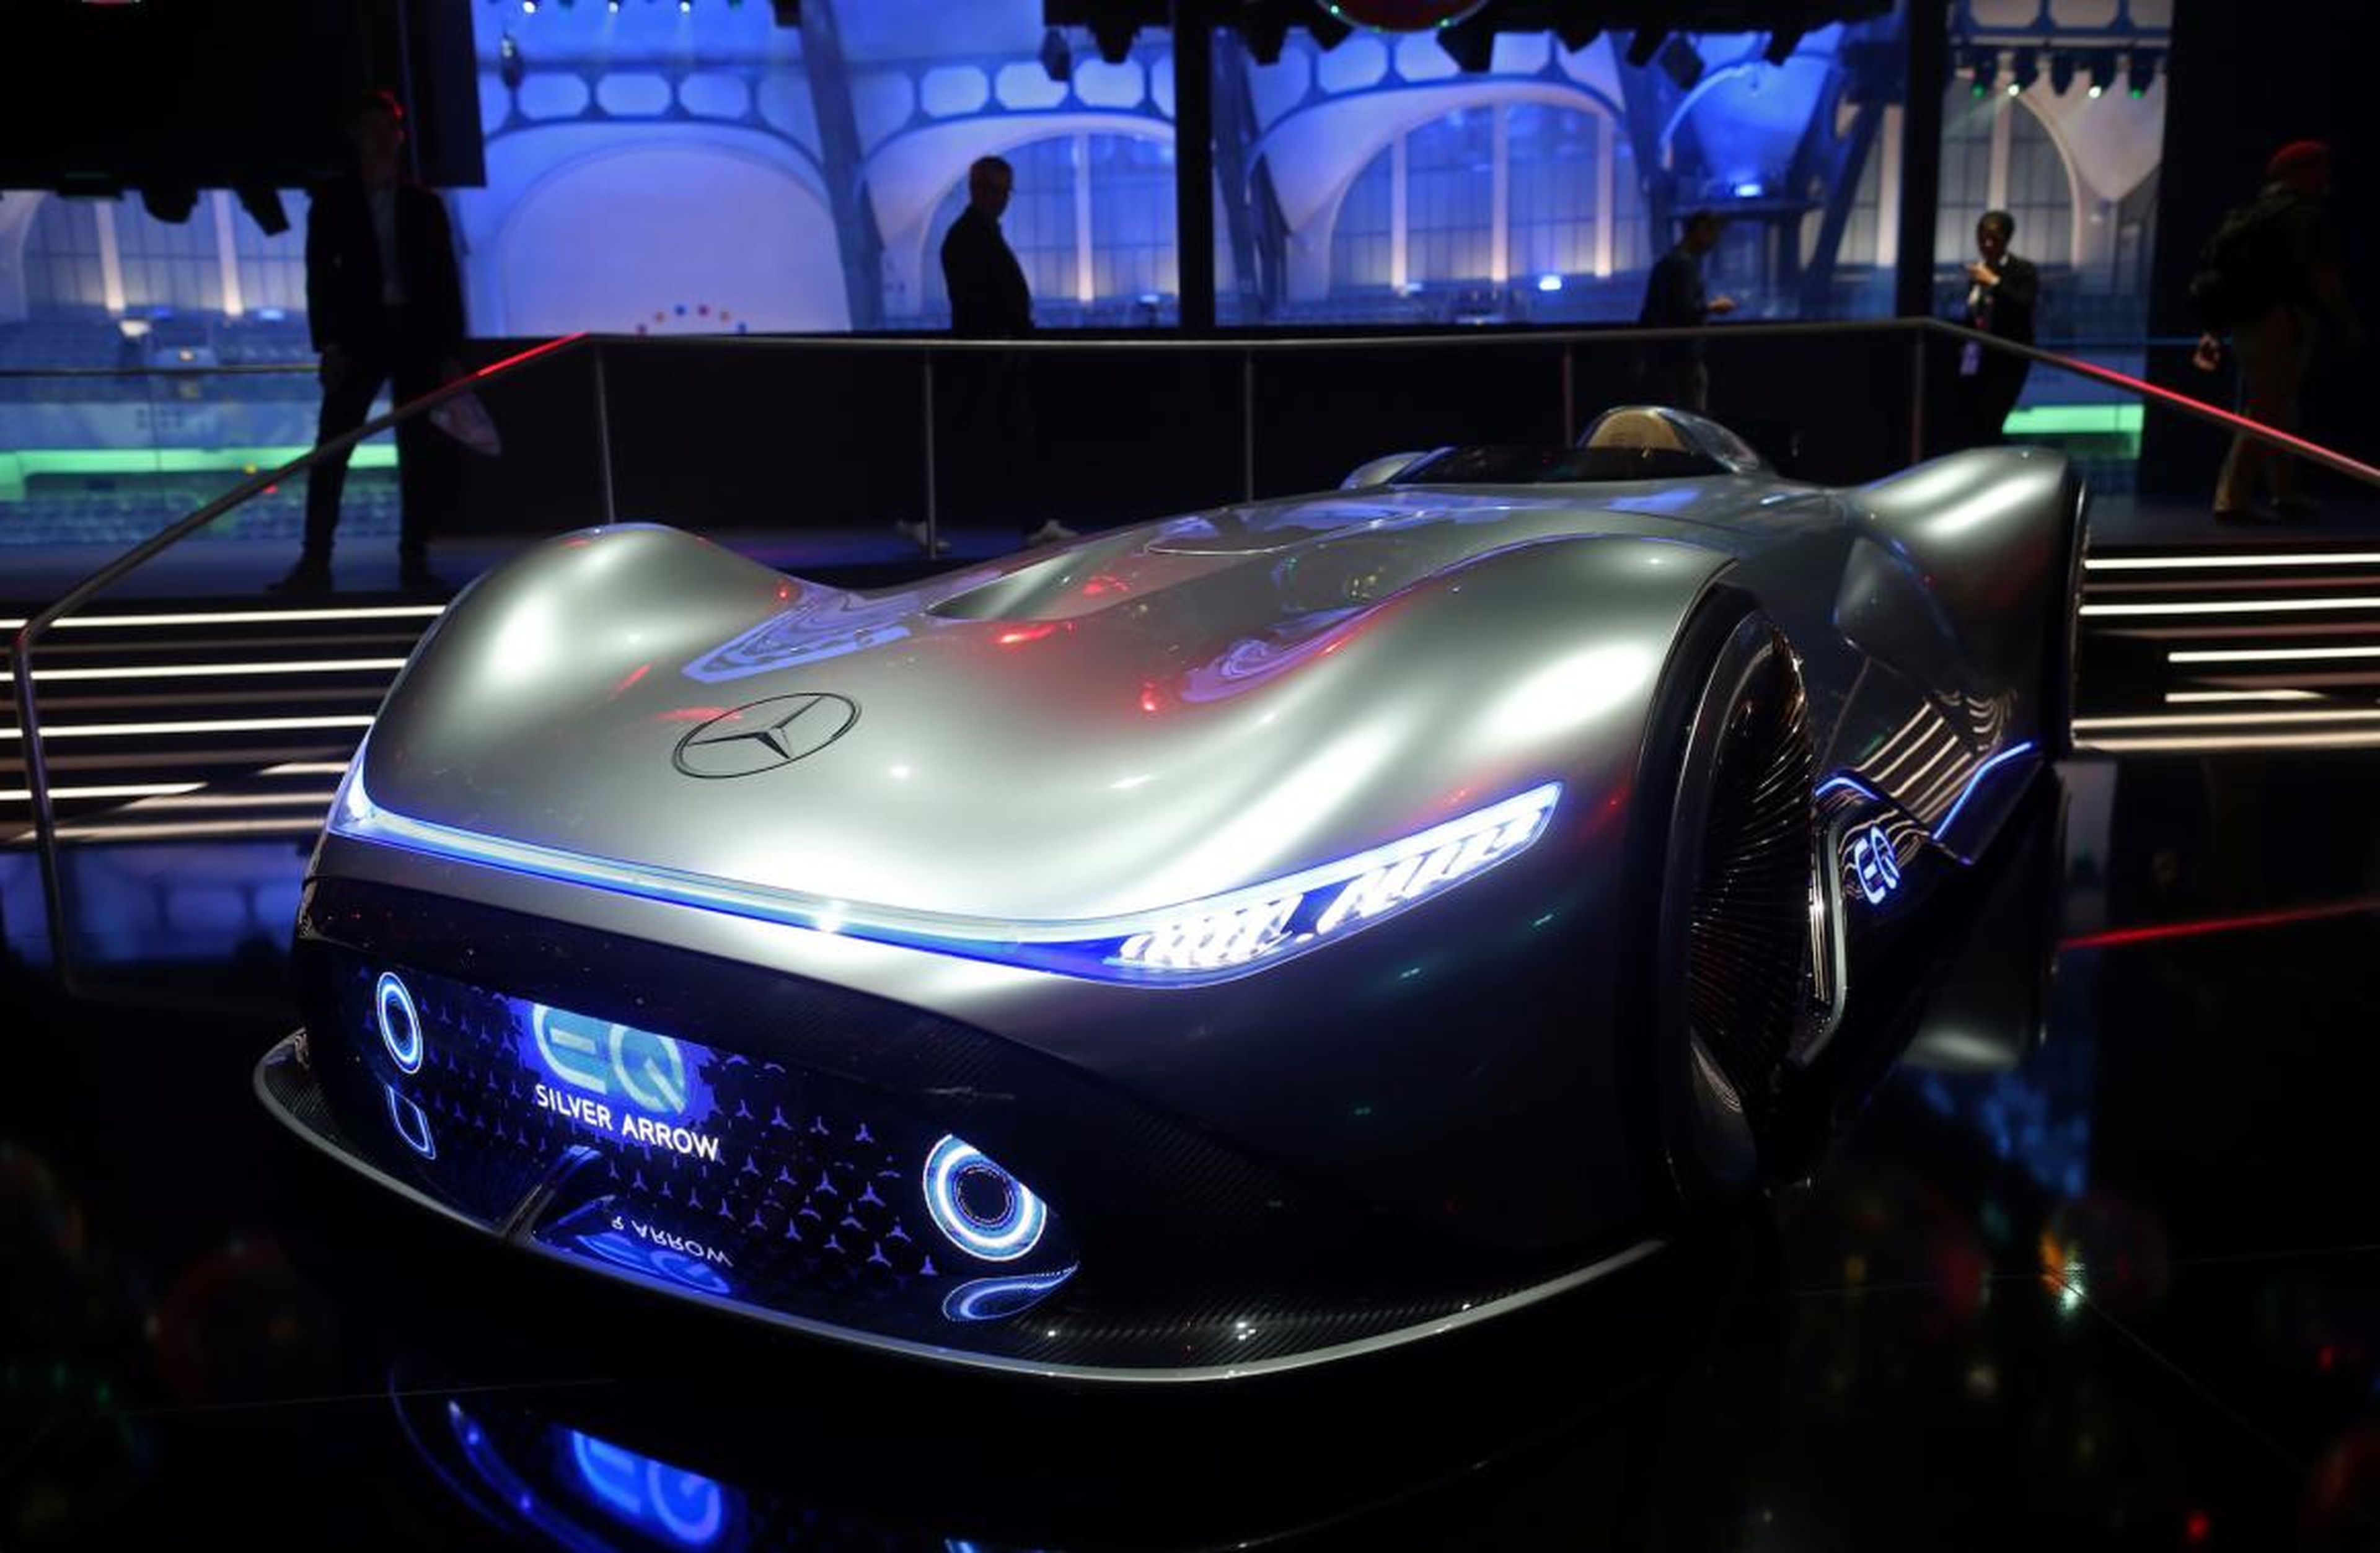 The Mercedes EQ Silver Arrow concept hit the show as a stylish all-electric homage to a car from the 1930s.